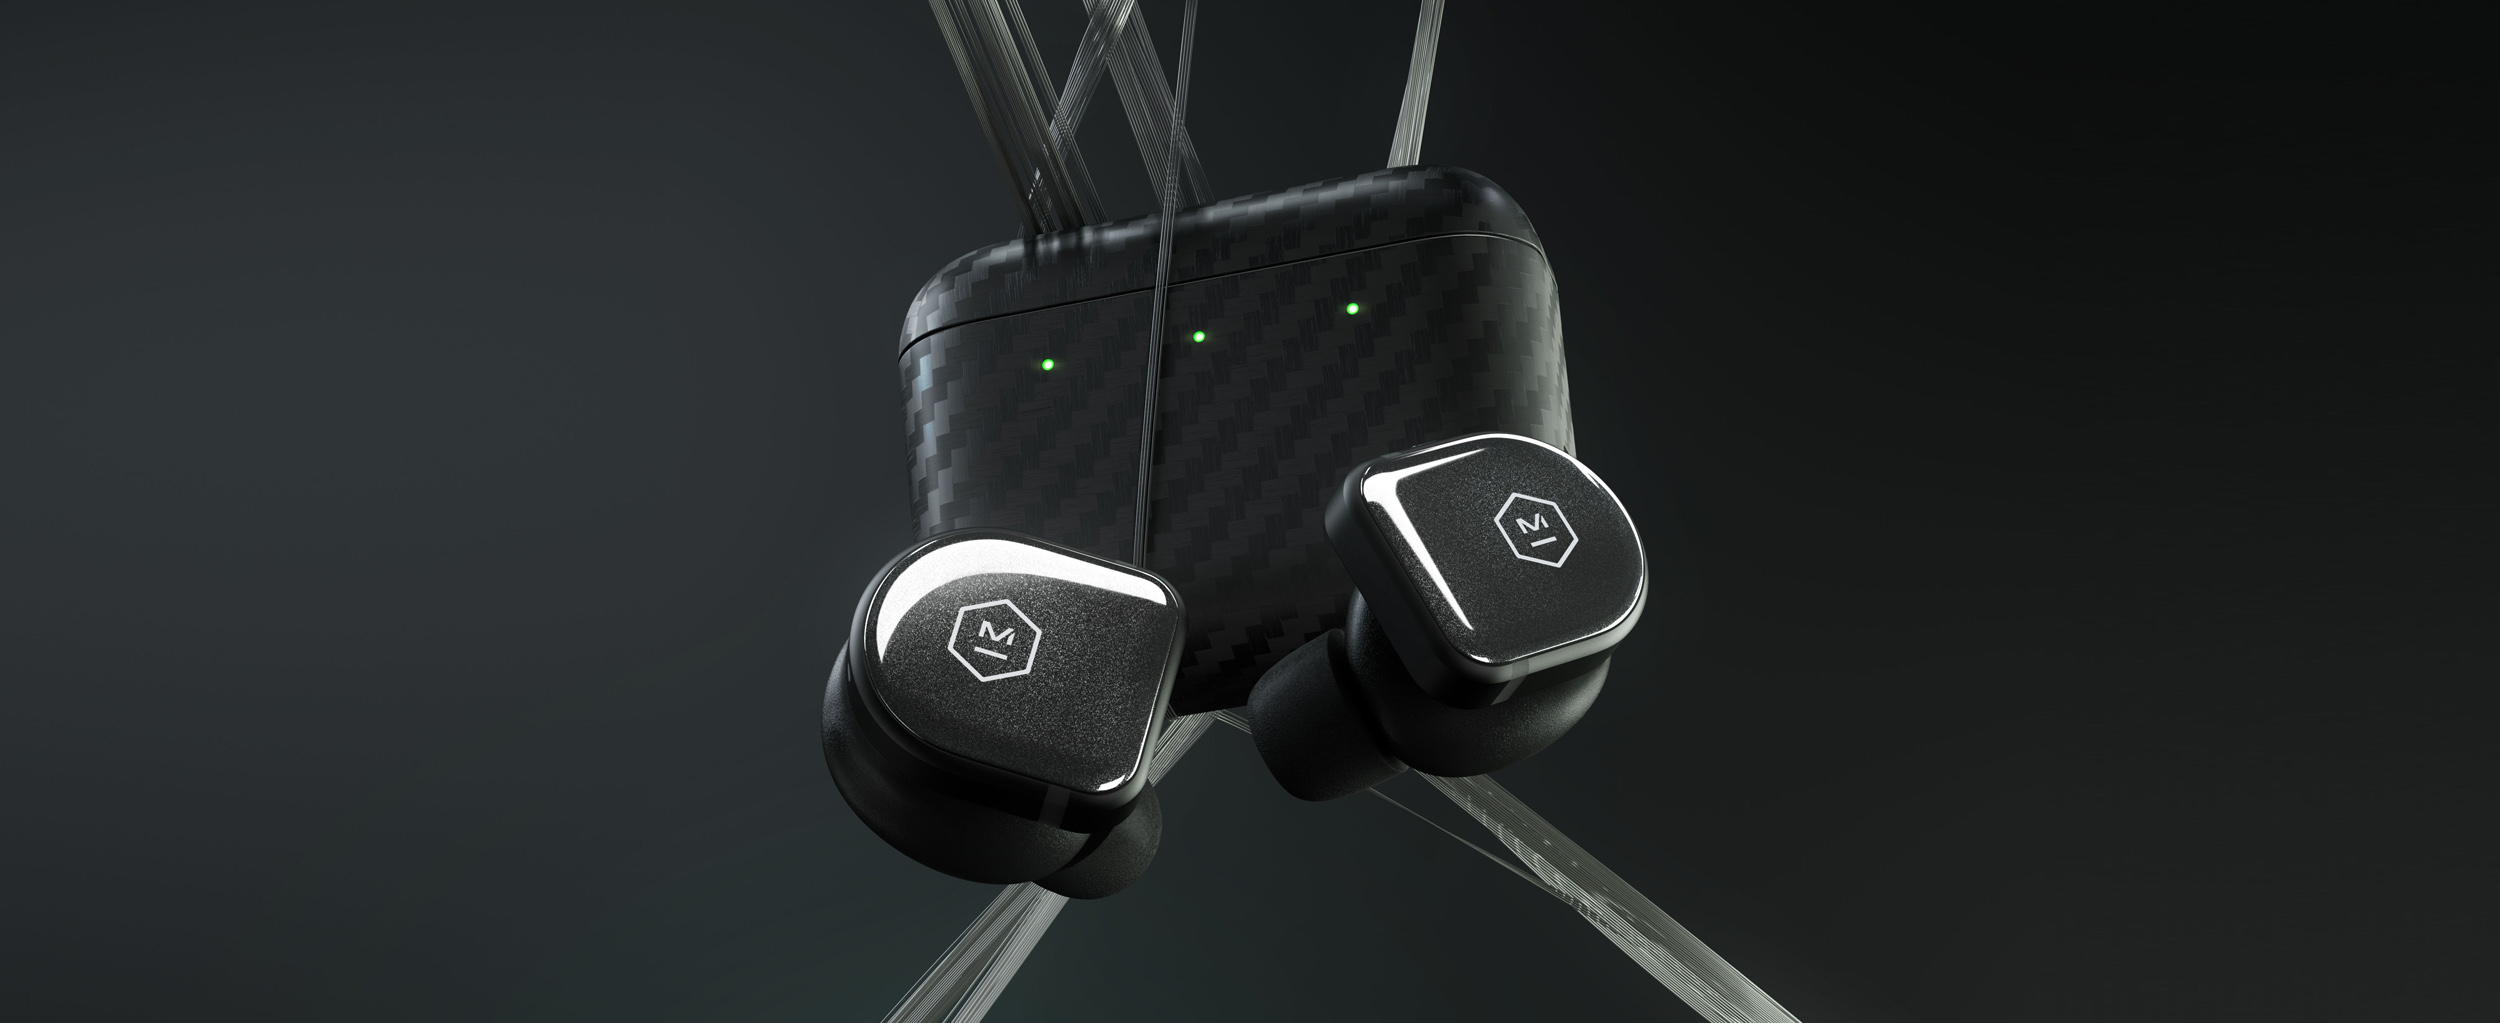 Know Your Sound Tool: MW08 Sport Active Noise-Cancelling True Wireless Earphones